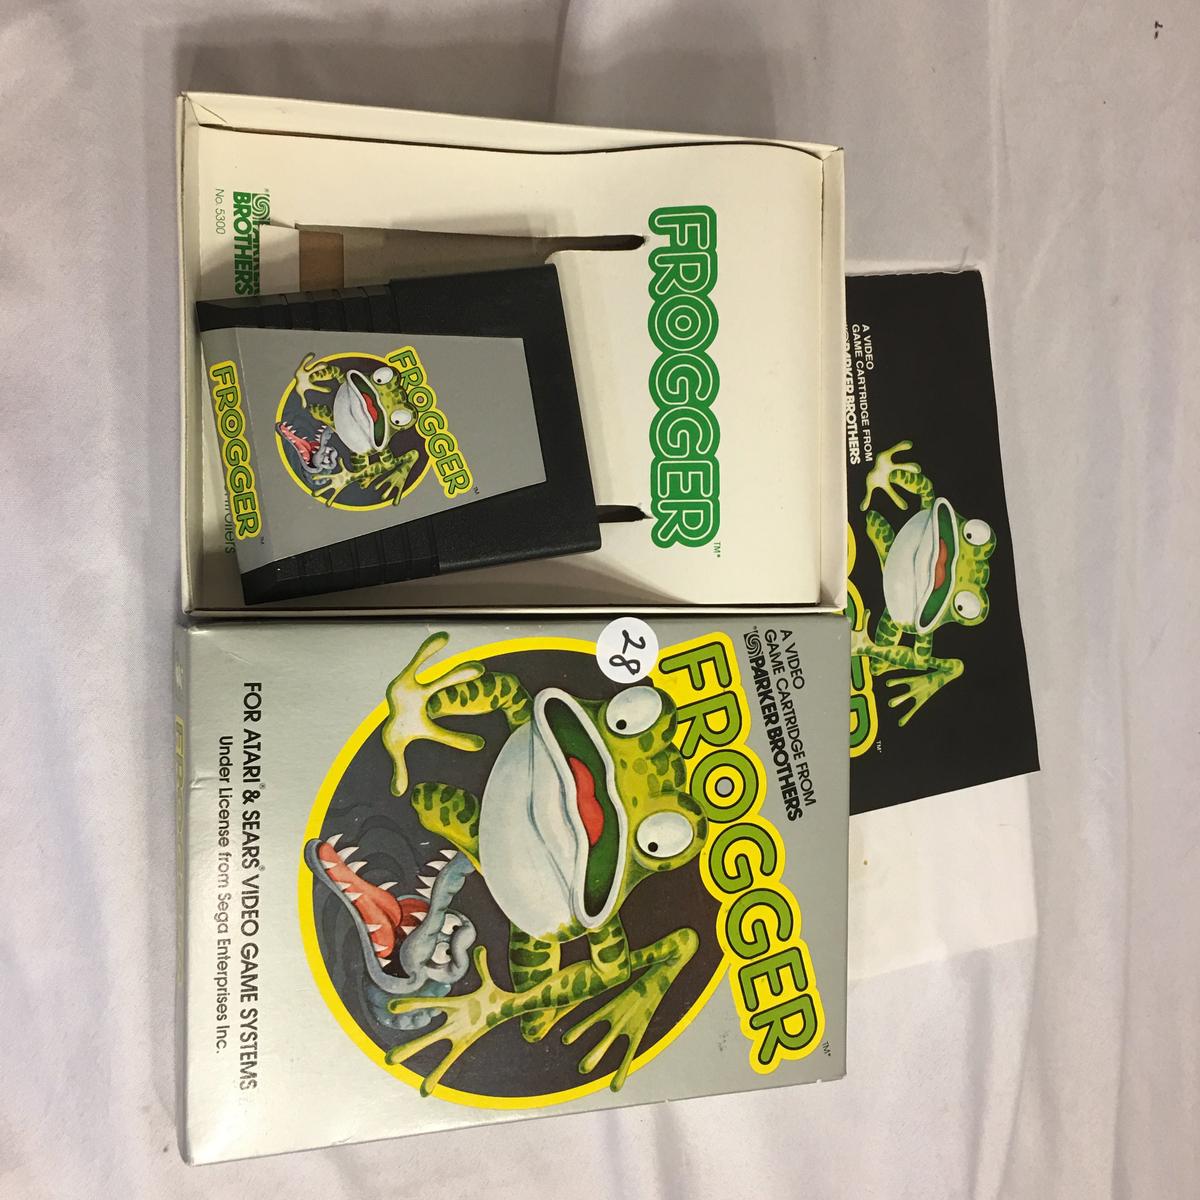 Collector Vintage A Video Game Cartridge From Parker Brothers "Frogger Game